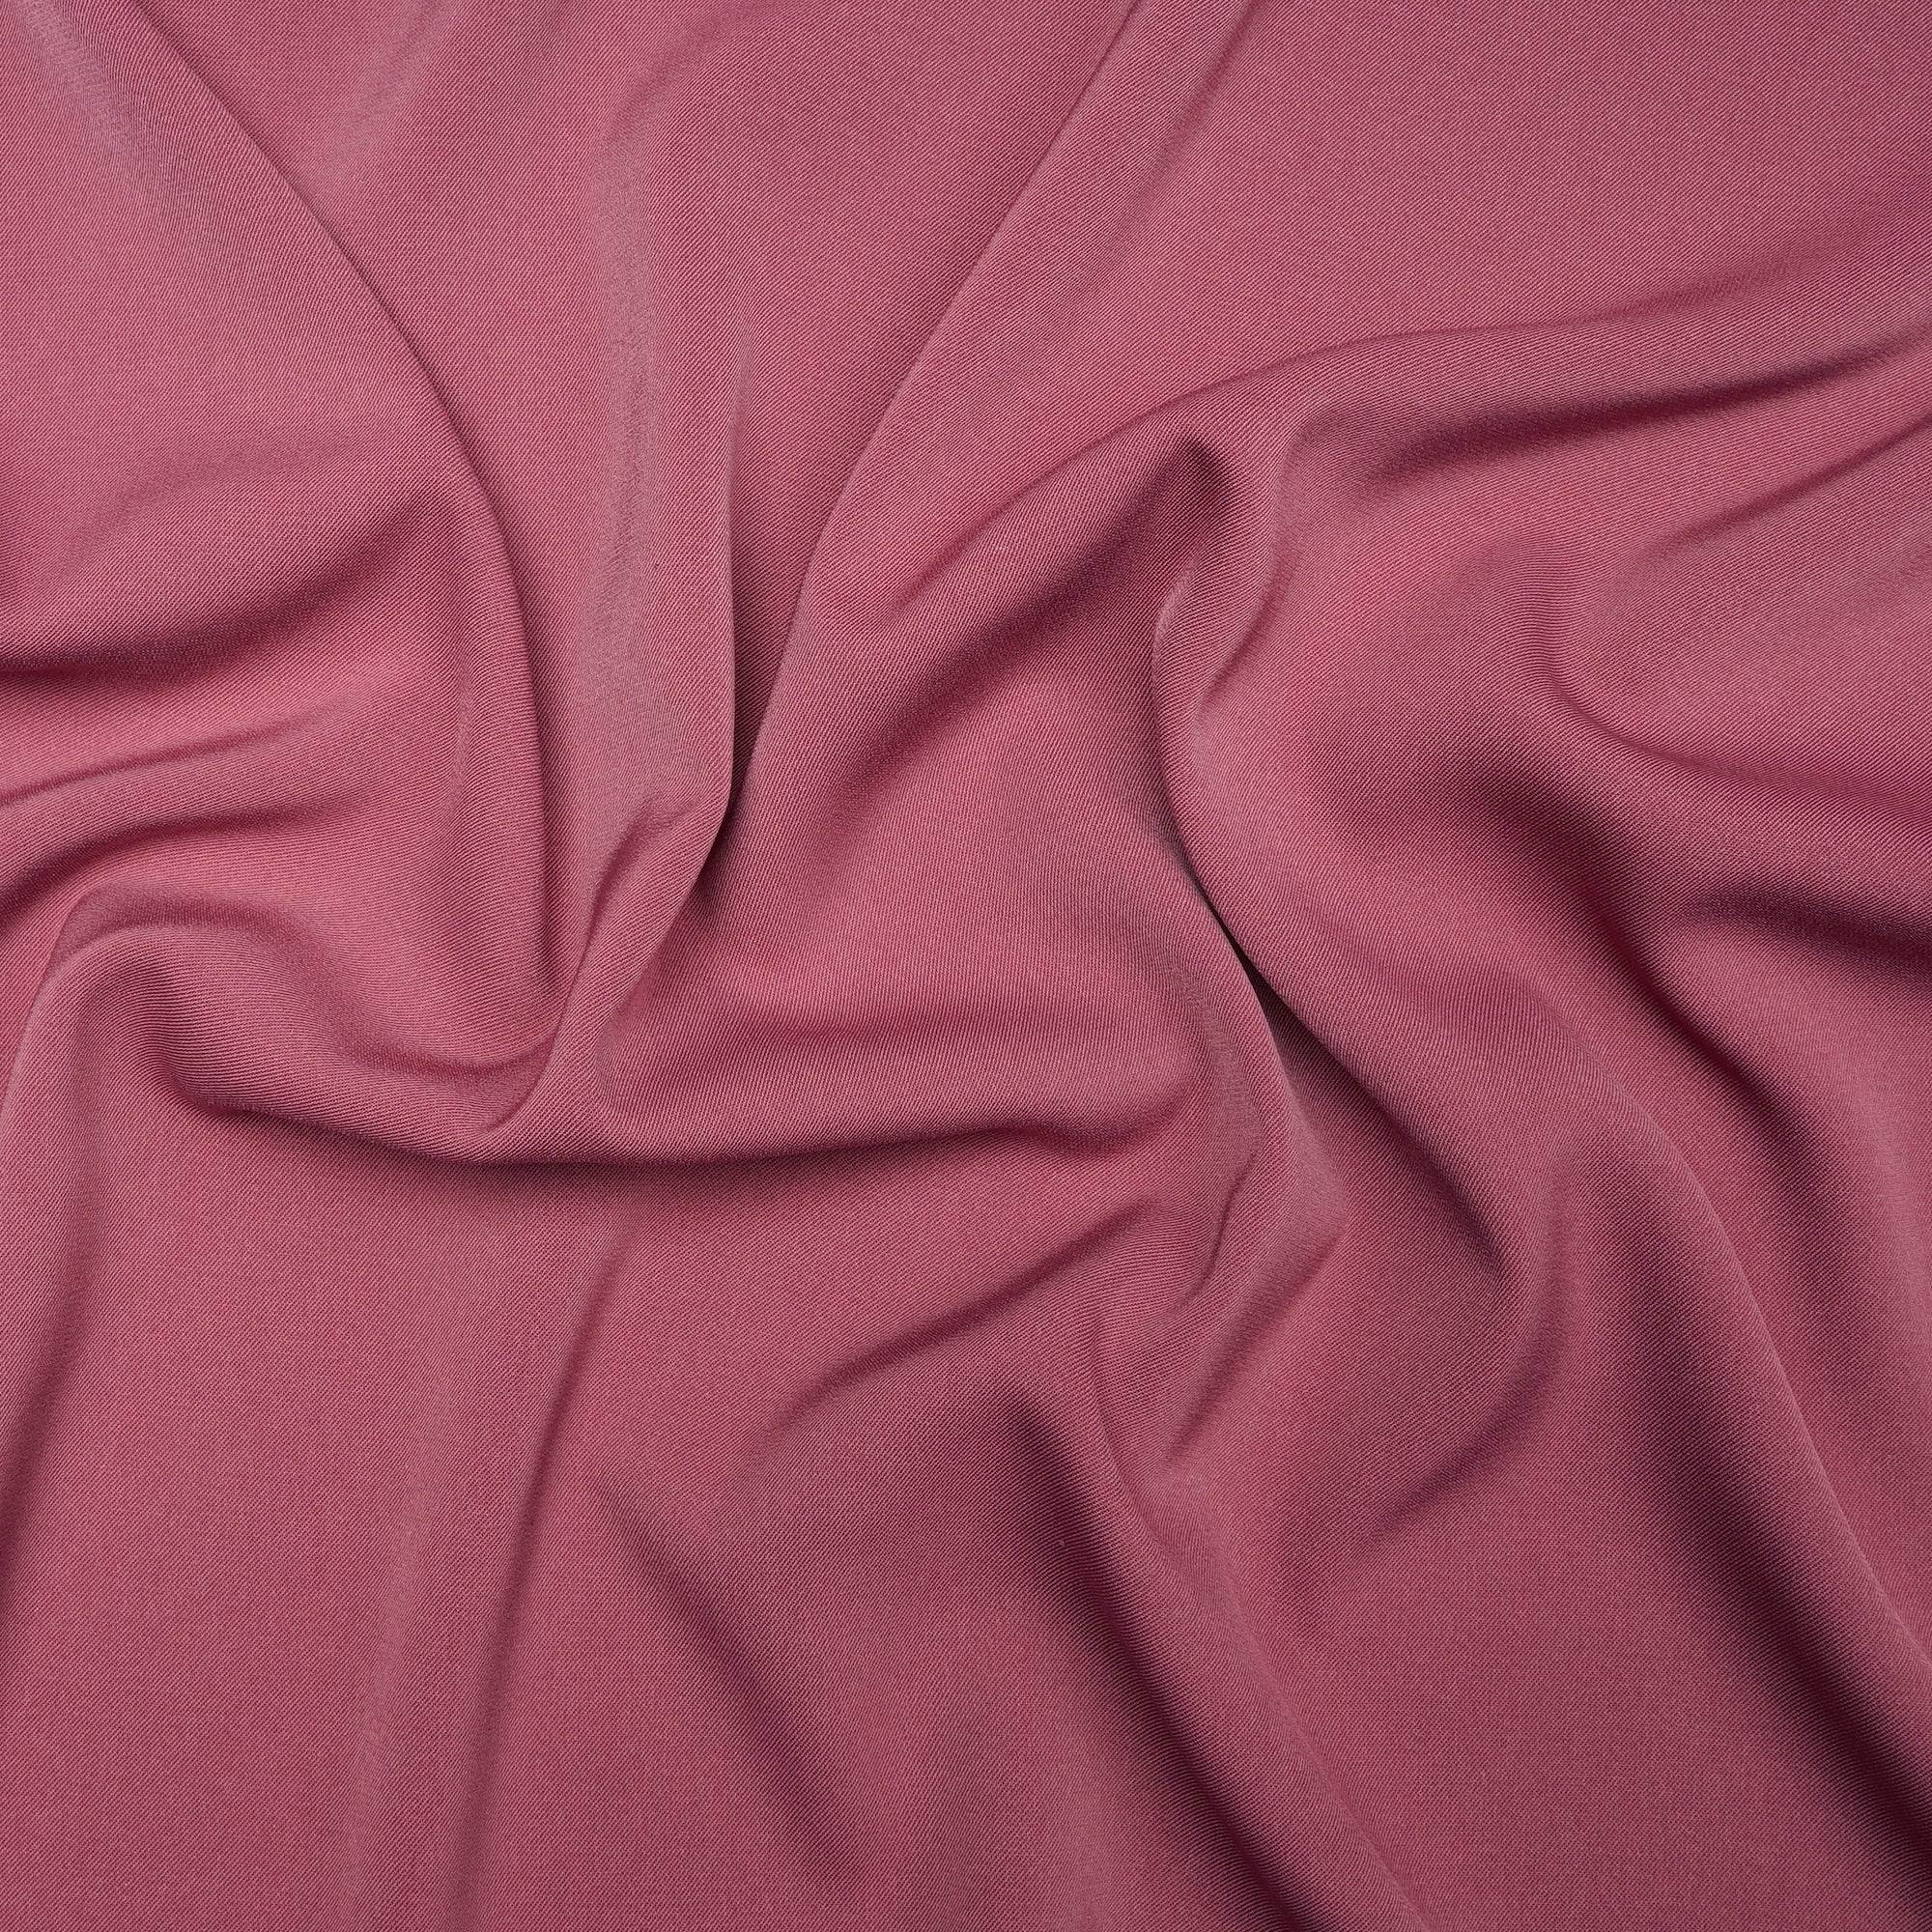 Faded Rose Solid Dyed Imported Prada Crepe Fabric (60" Width)